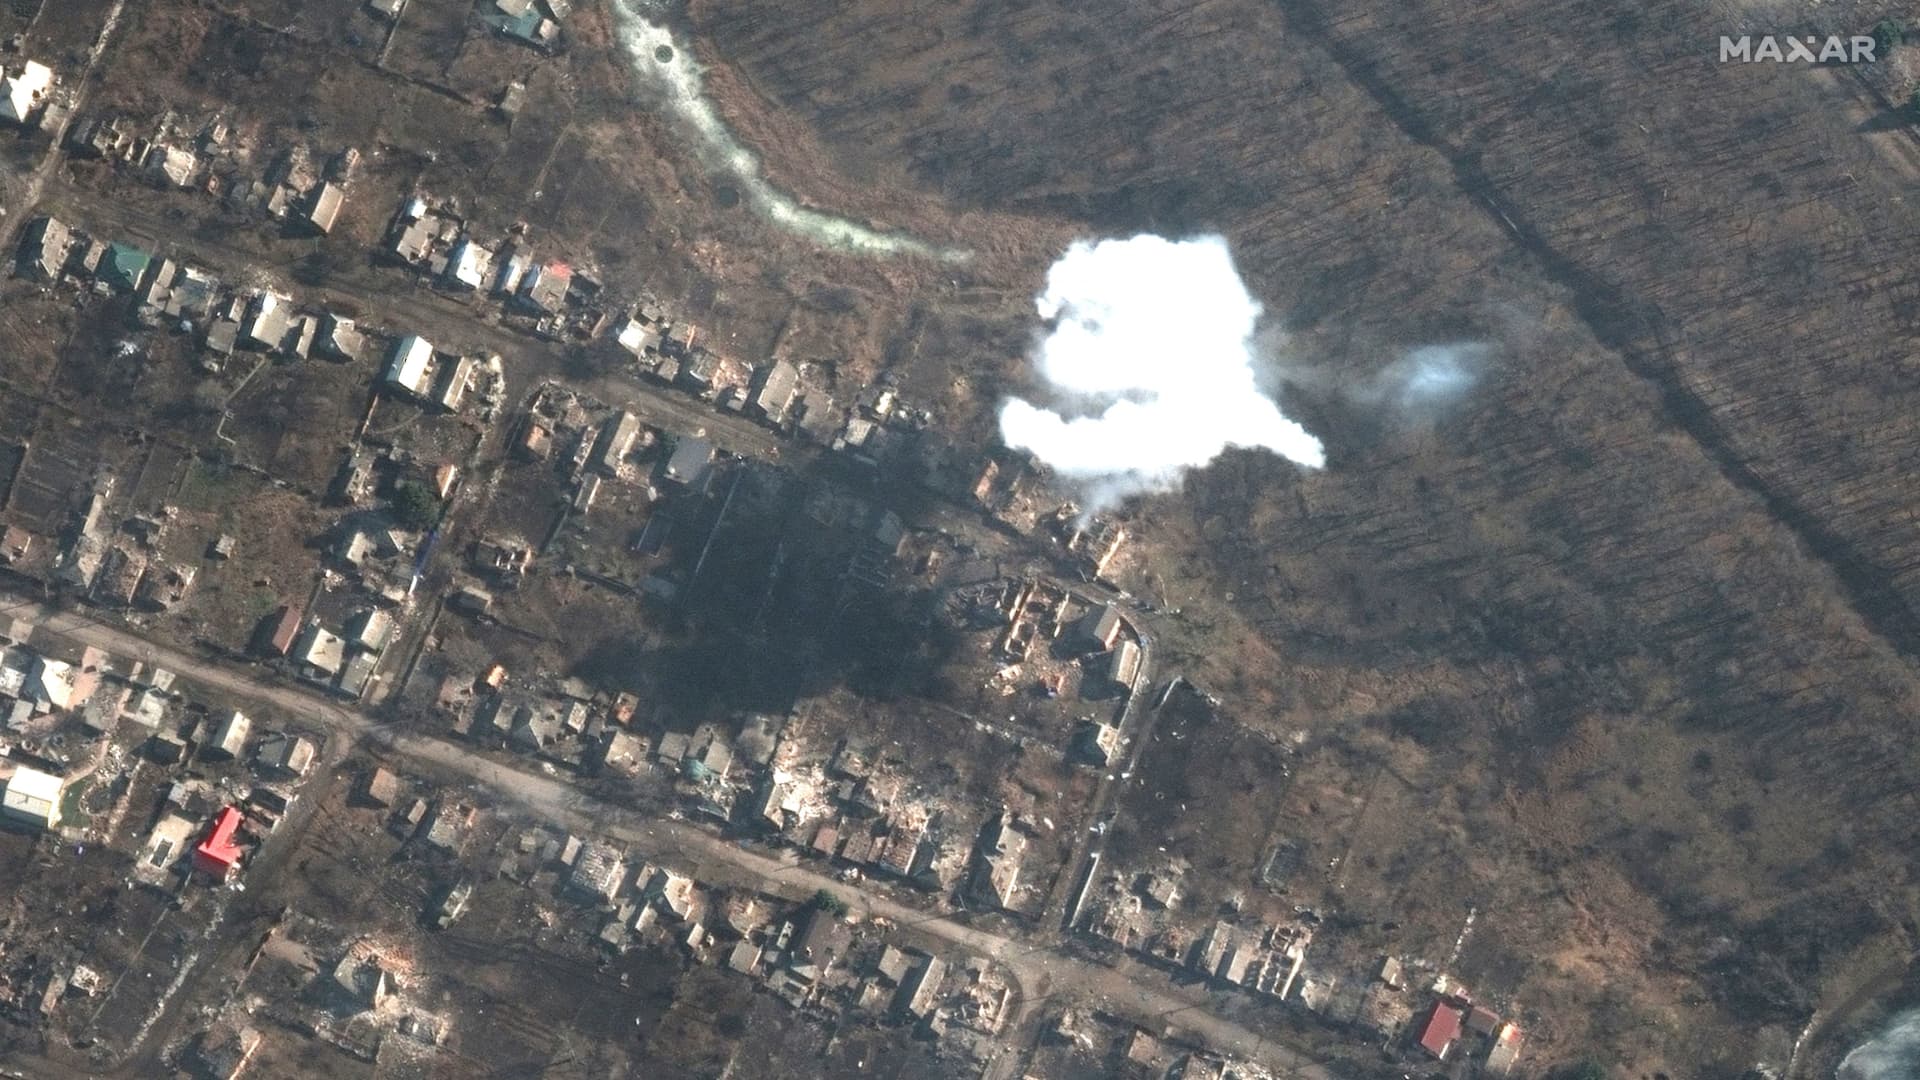 A satellite image shows smoke from recently dropped ordnance in southern Bakhmut, Ukraine, on March 6, 2023.